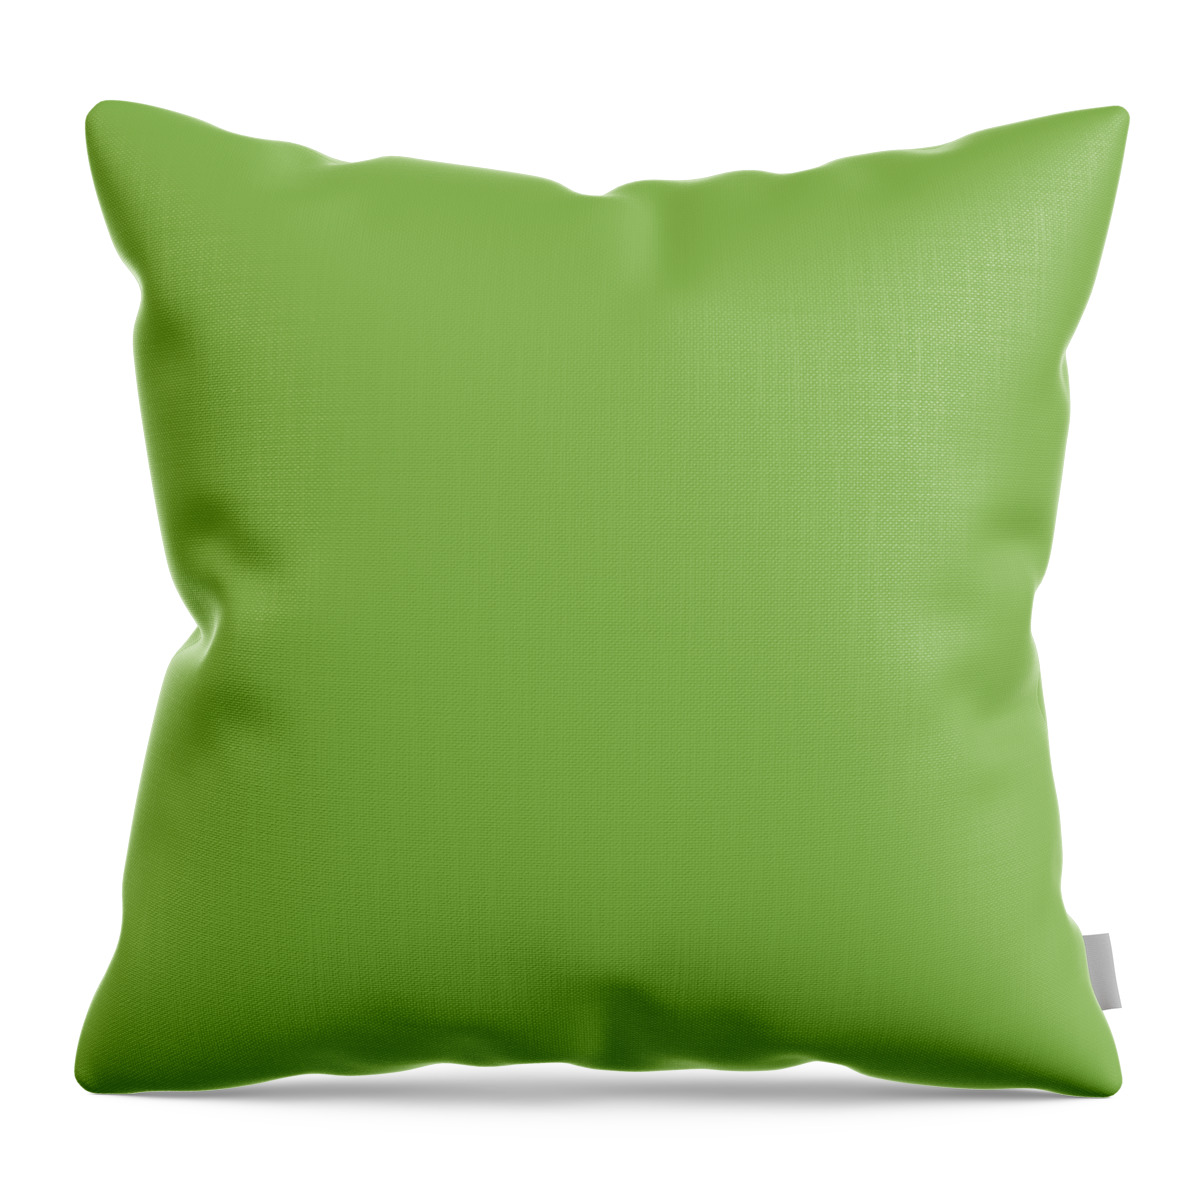 Savoy Throw Pillow featuring the digital art Savoy by TintoDesigns